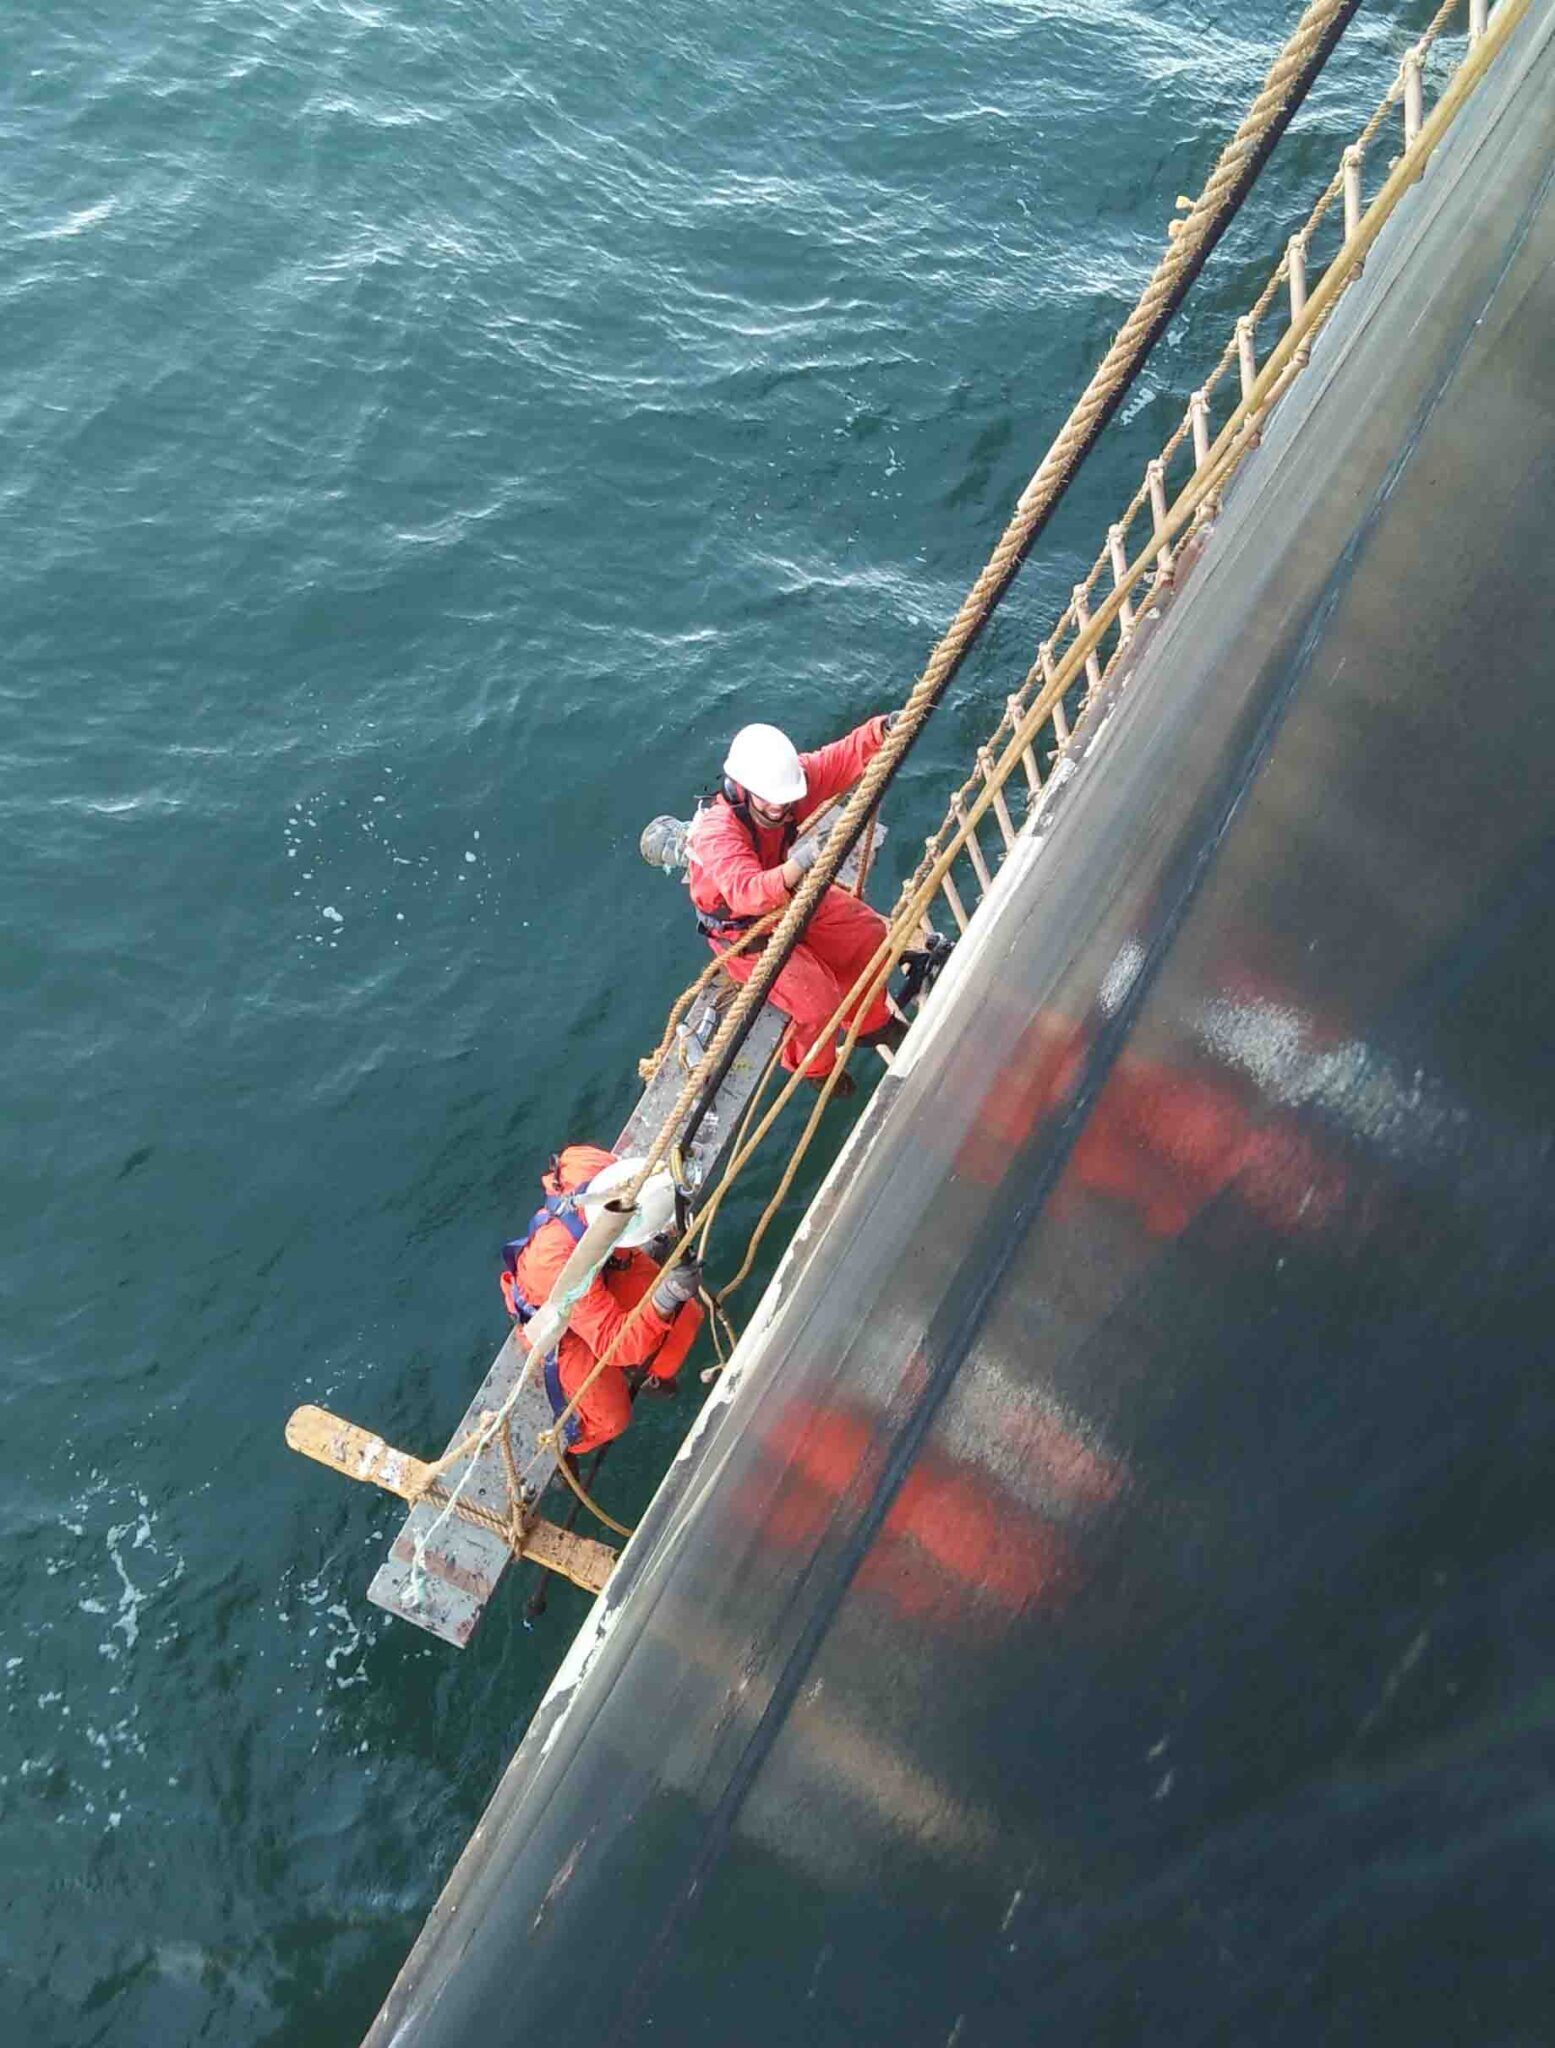 Deck crew using a Stage Plank, Gondola, or Gindola while working over the ship's side.